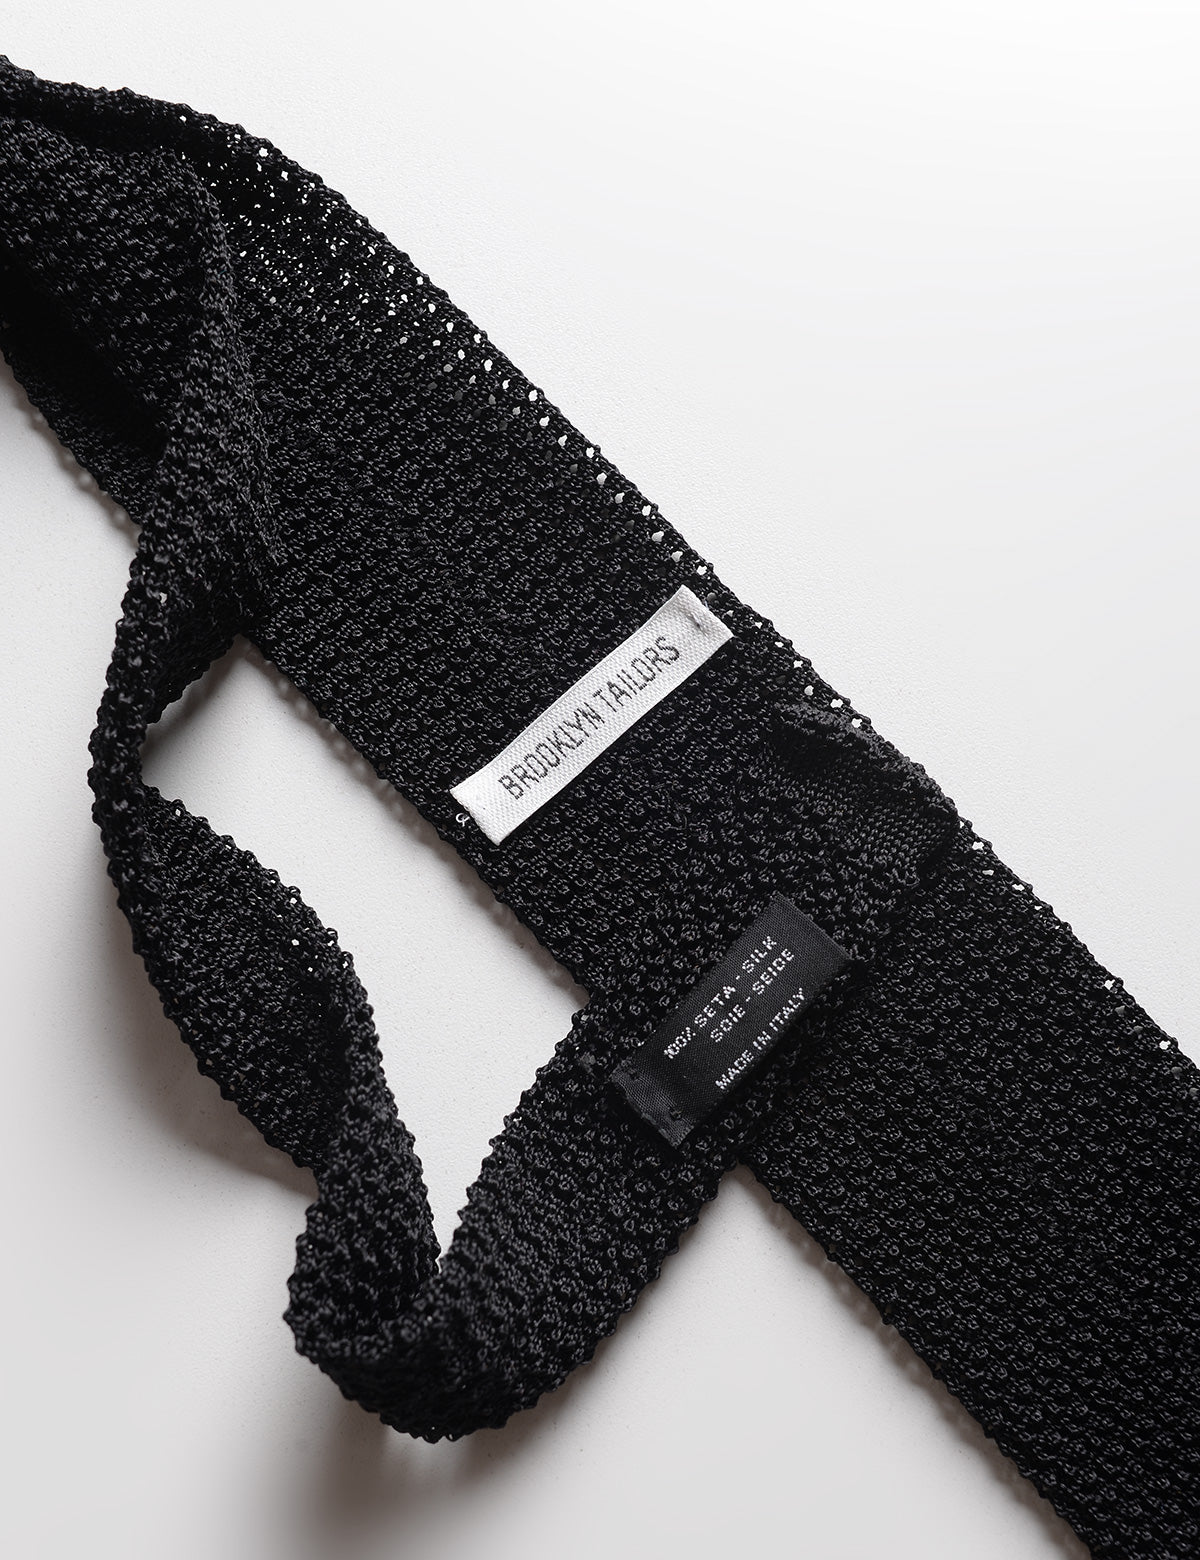 Detail of labels and knit of Italian Silk Knit Tie - Black